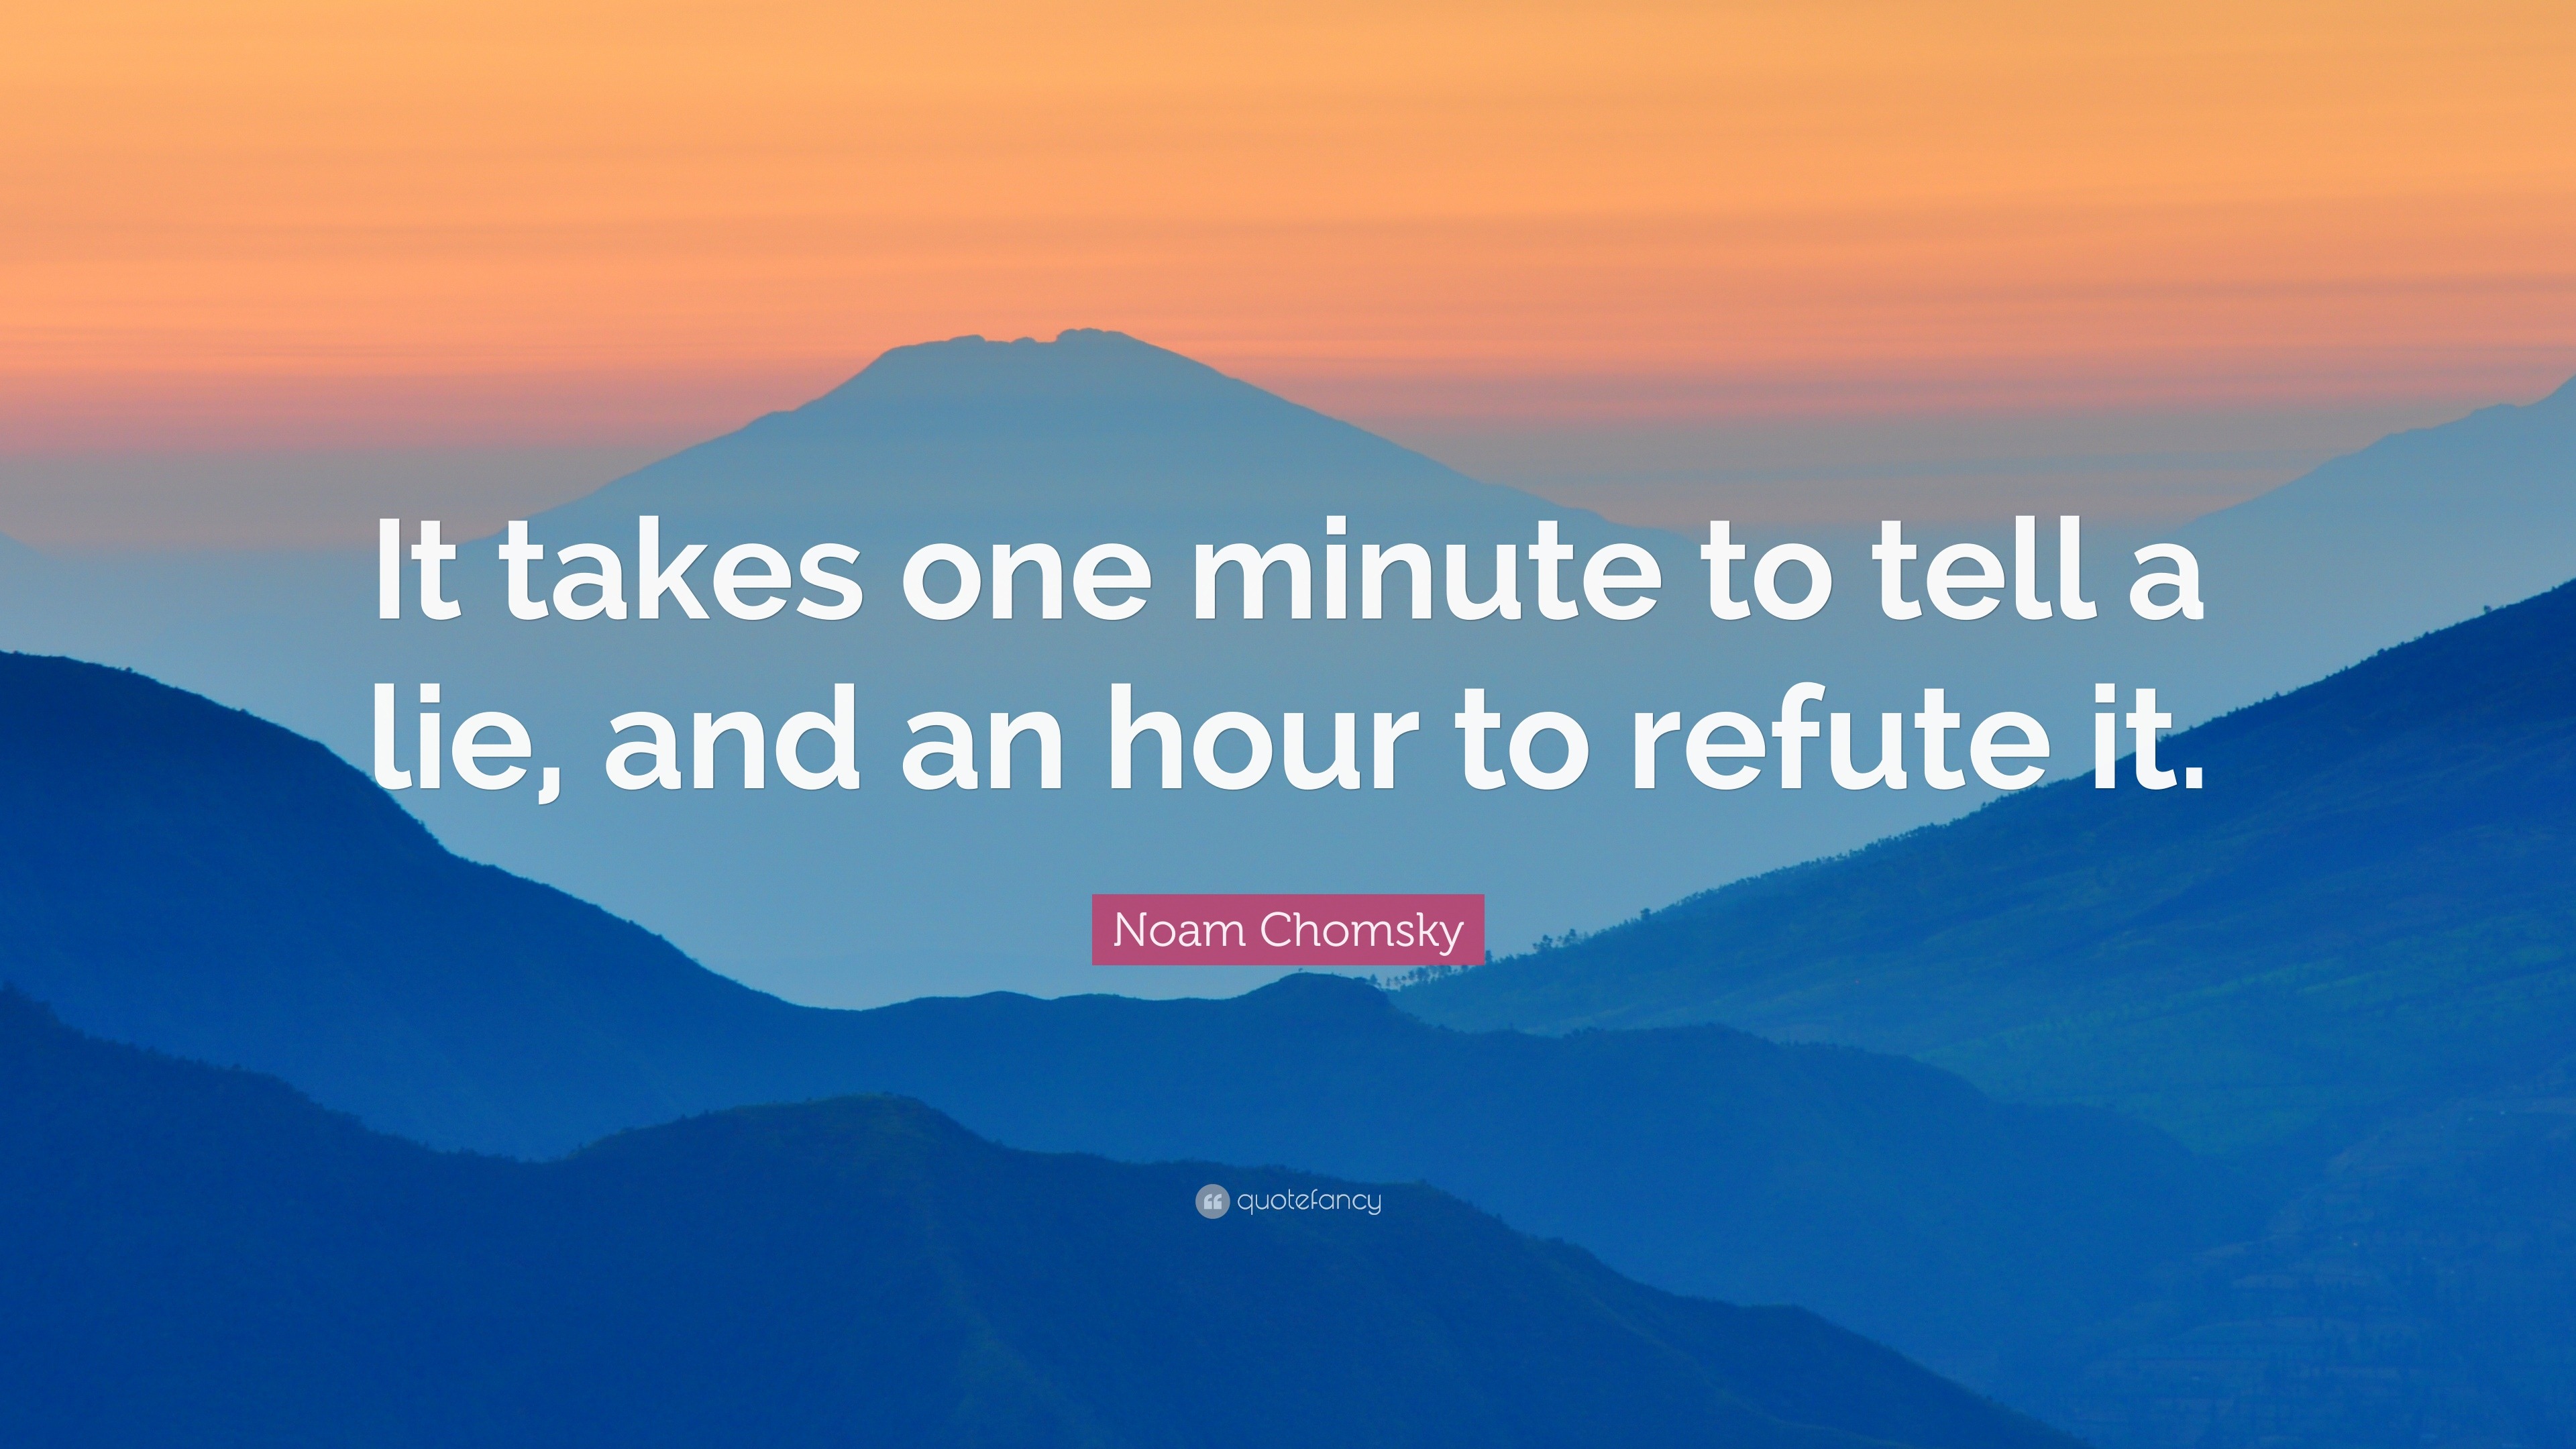 Noam Chomsky Quote: “It takes one minute to tell a lie, and an hour to ...